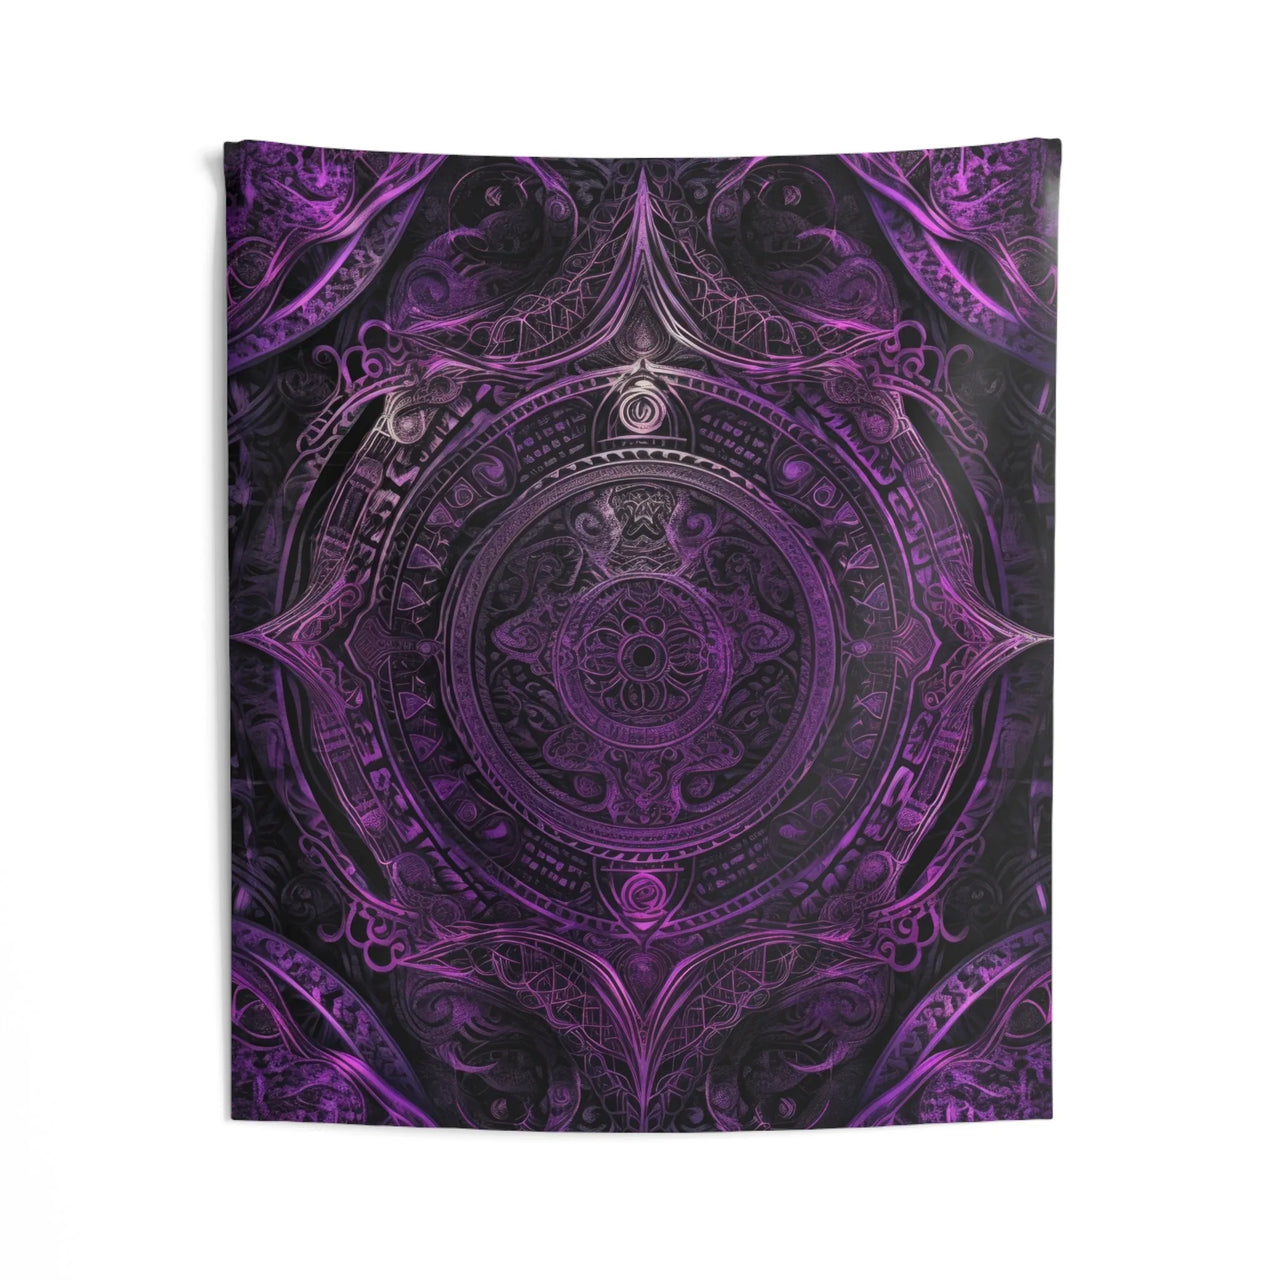 Camping Festival Mystic Symphony Tapestry in the Celestial Art Style with Symmetrical Deep Purple Design - GroovyGallery